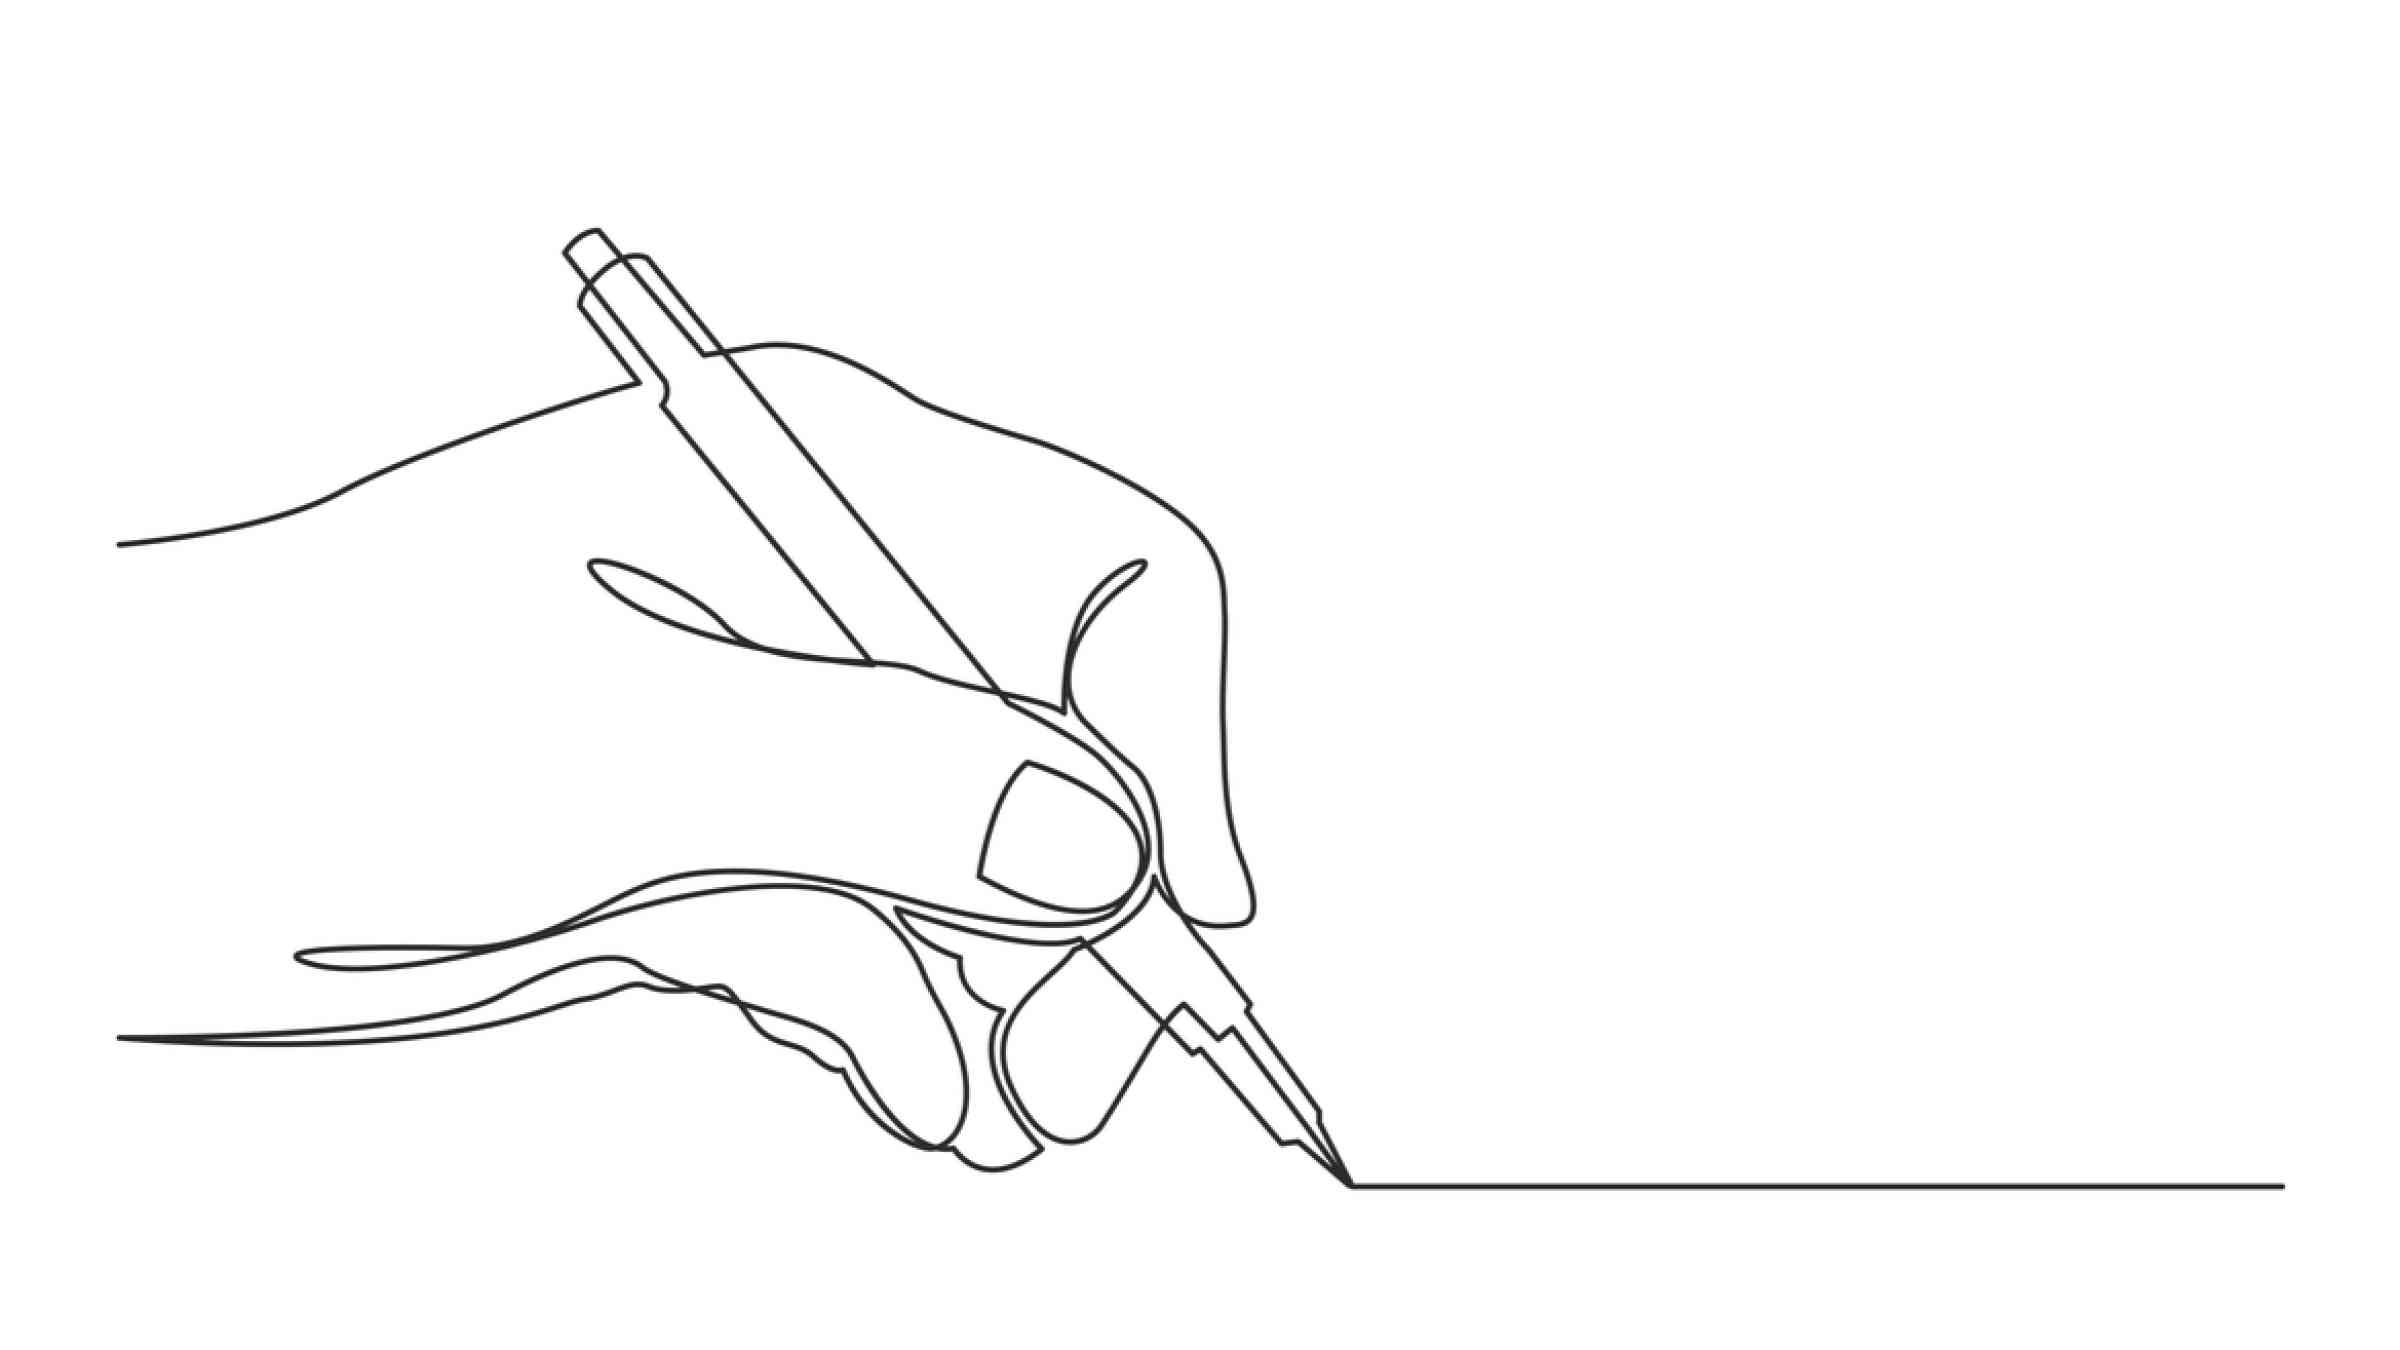 Continuous line drawing of hand